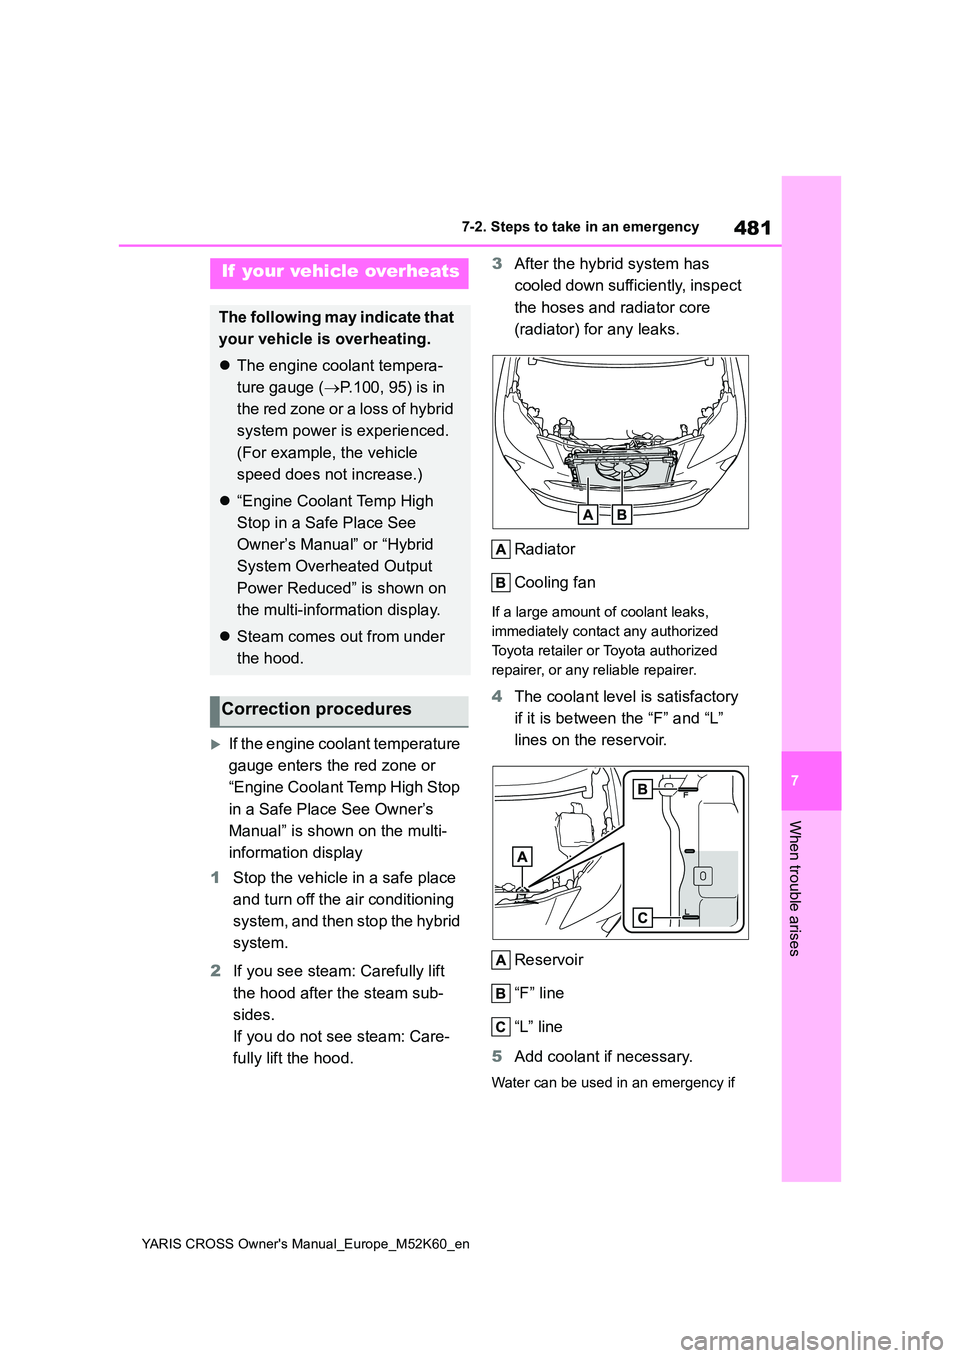 TOYOTA YARIS CROSS 2021  Owners Manual 481
7
YARIS CROSS Owner's Manual_Europe_M52K60_en
7-2. Steps to take in an emergency
When trouble arises
If the engine coolant temperature  
gauge enters the red zone or  
“Engine Coolant Tem